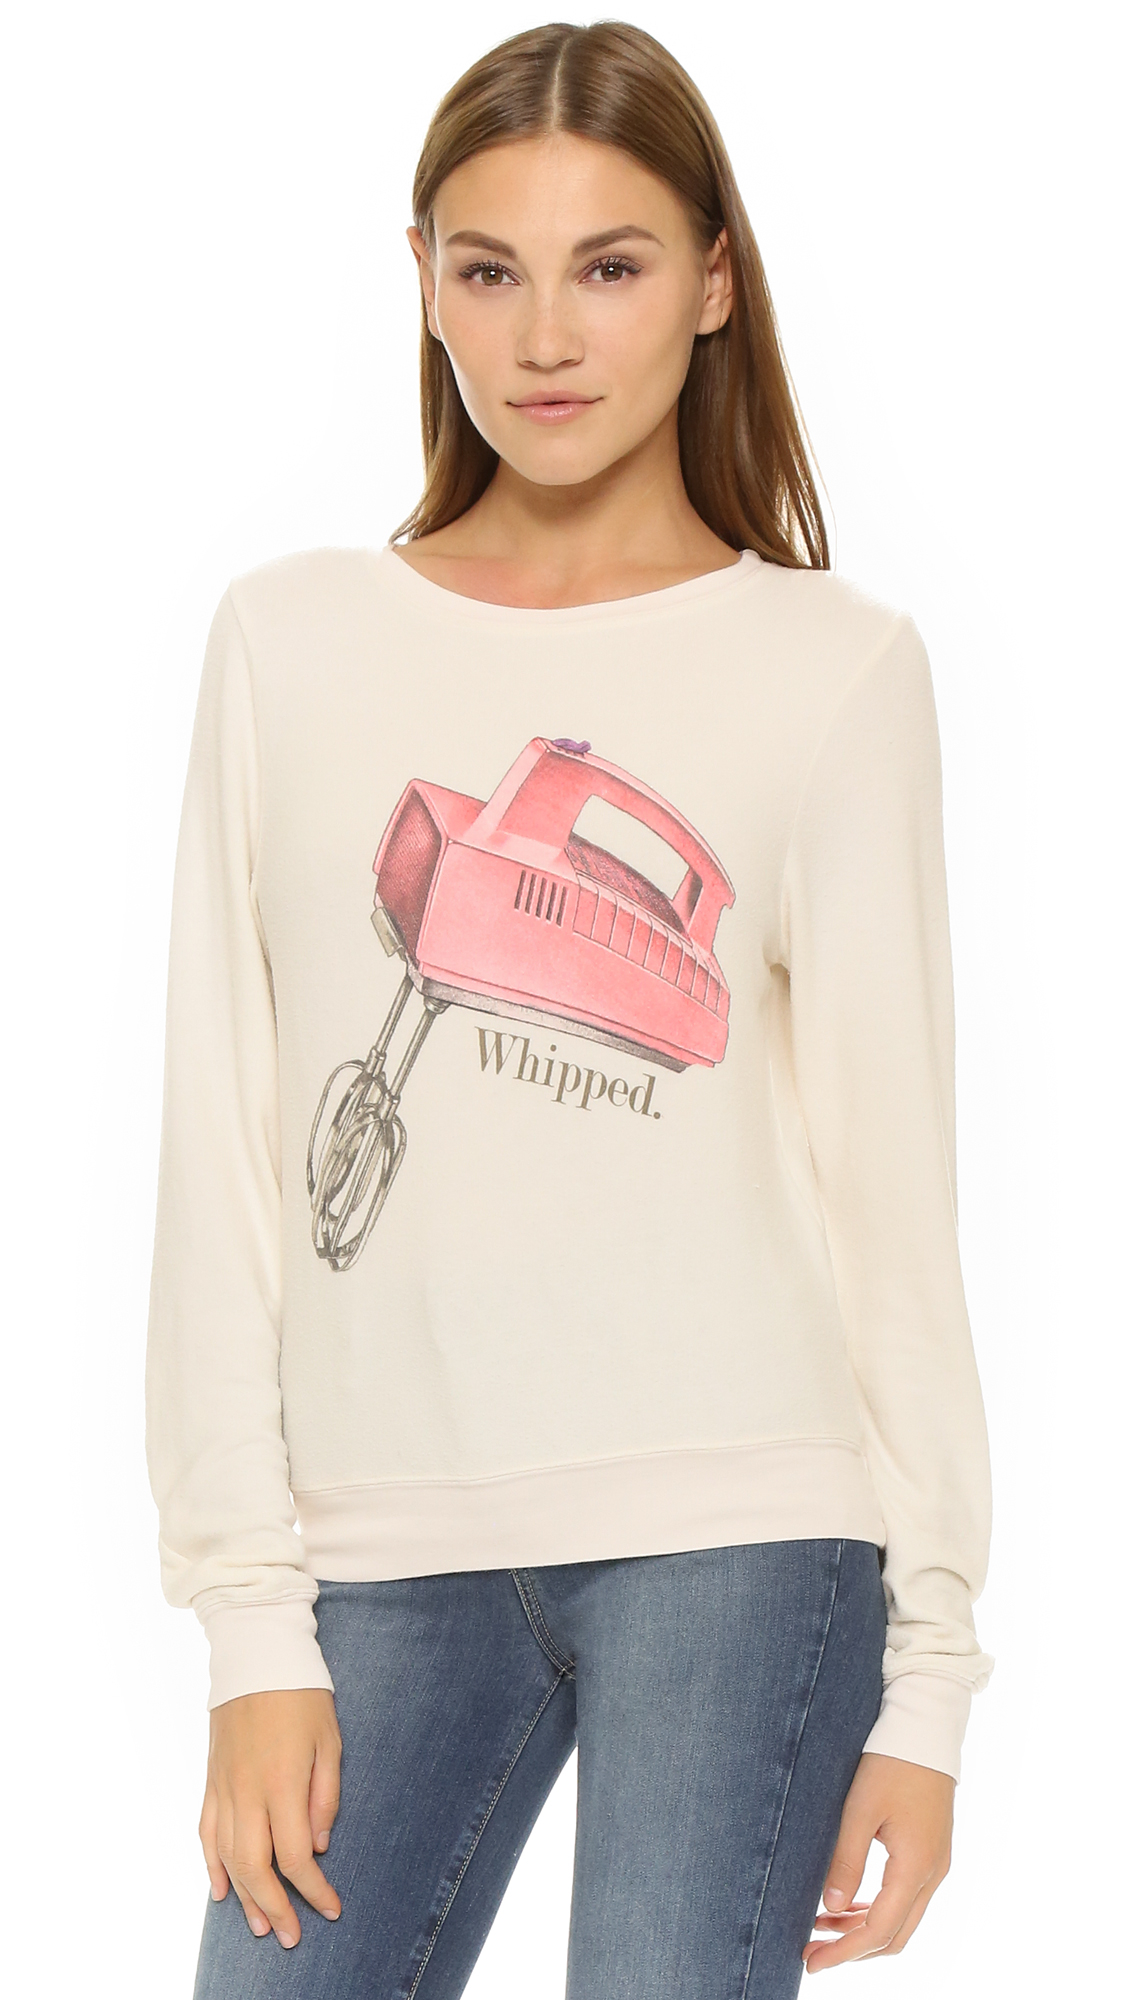 Lyst - Wildfox Whipped Sweatshirt in Pink